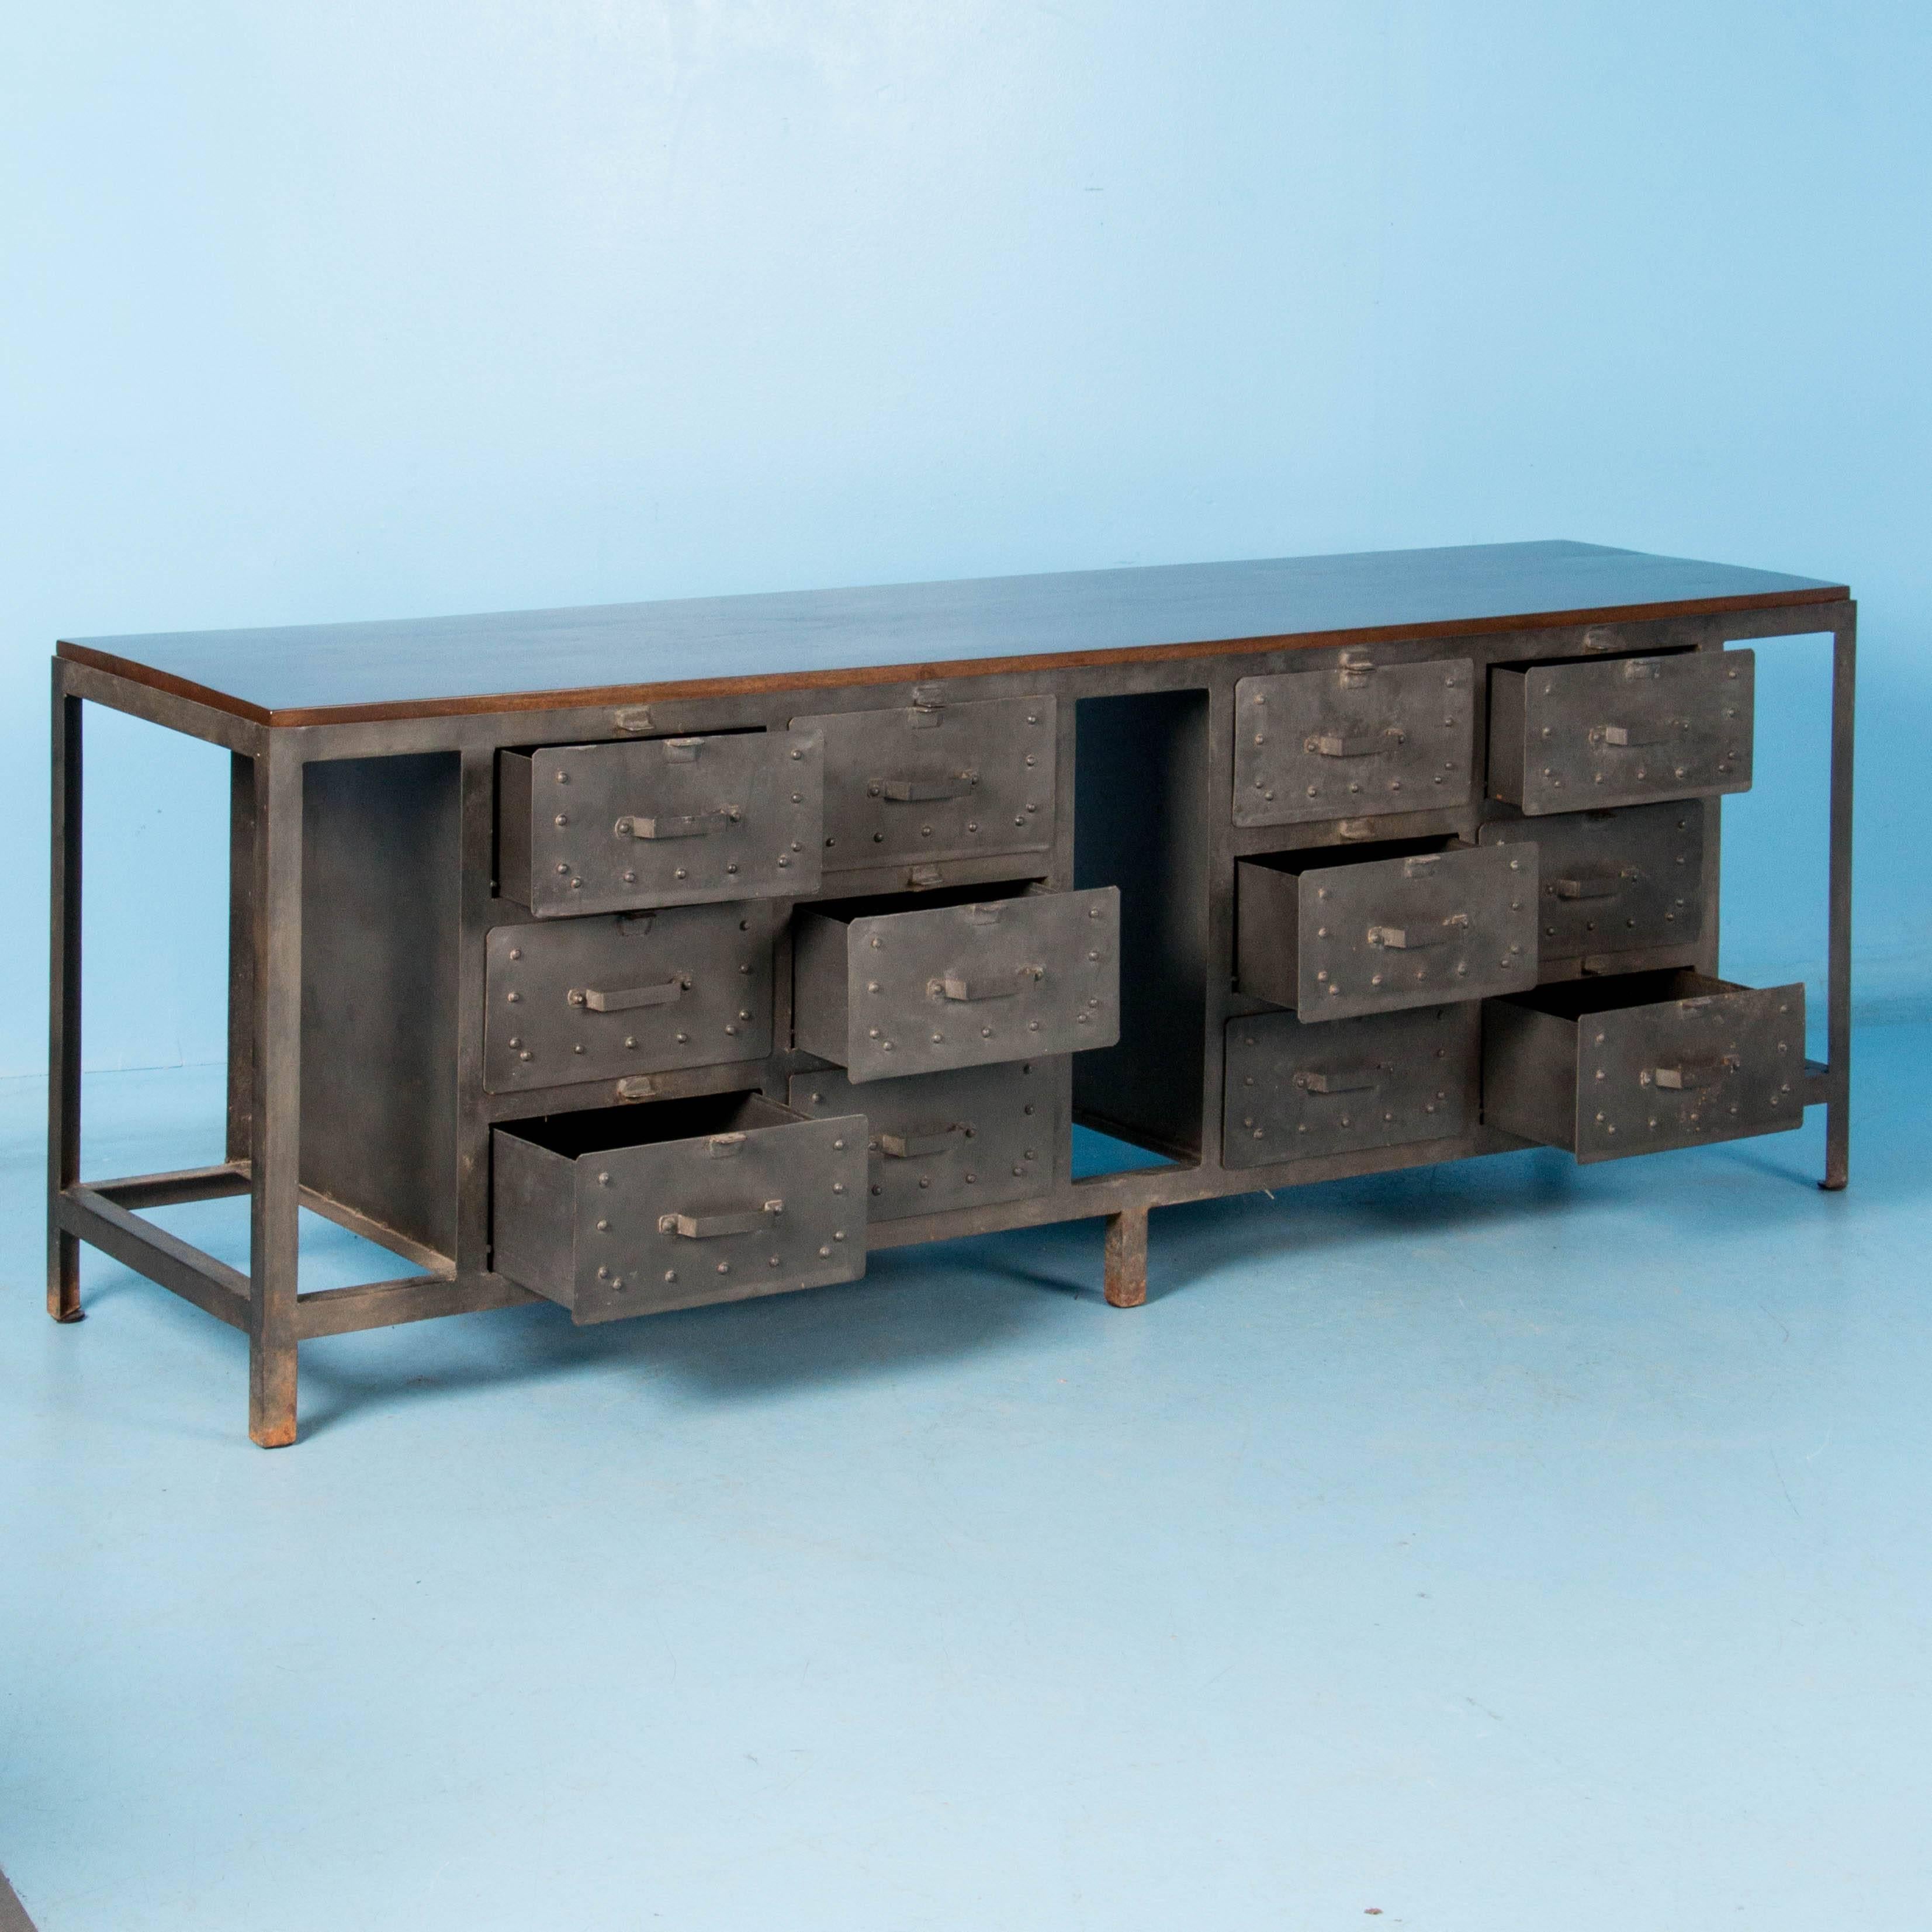 This new Industrial style sideboard features 12 drawers, each with a simple handle and riveted detail. The top, which is removable and recessed into the gray metal, is sheesham wood, made from the red heartwood. Think of this as a kitchen island,